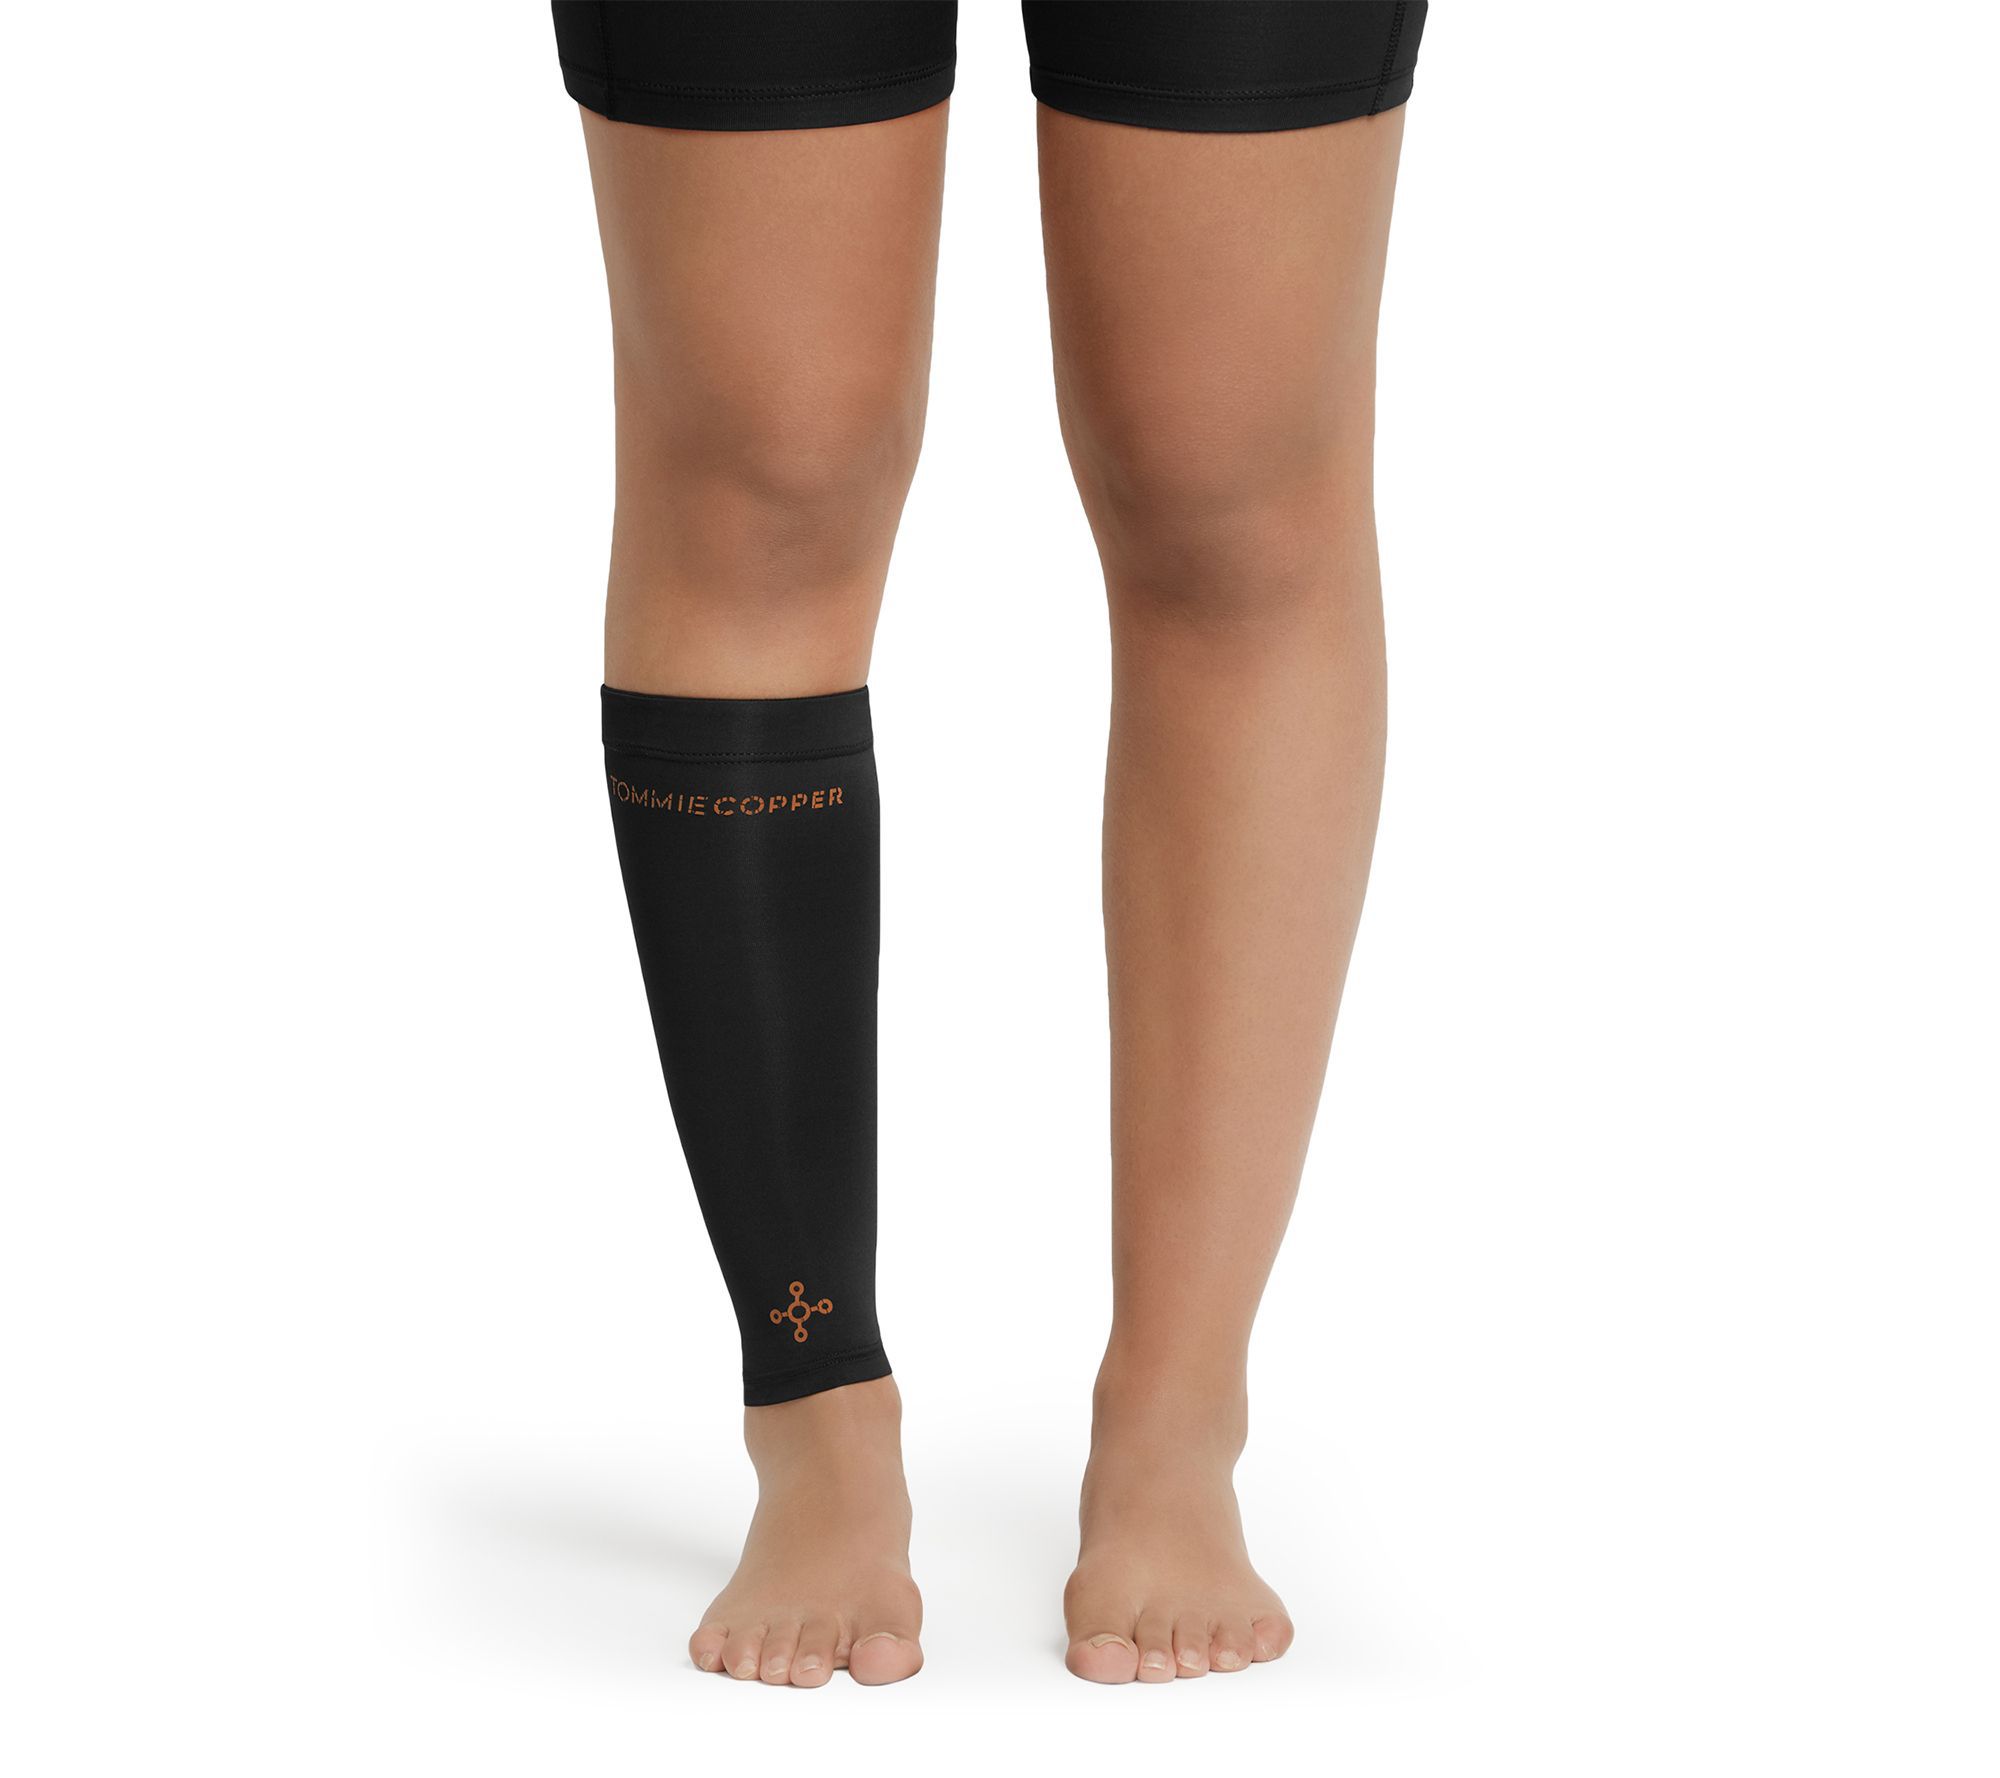 2 Pairs Tommie Copper Sport Compression Socks Foot Aches & Pain Relief S/M  L/XL